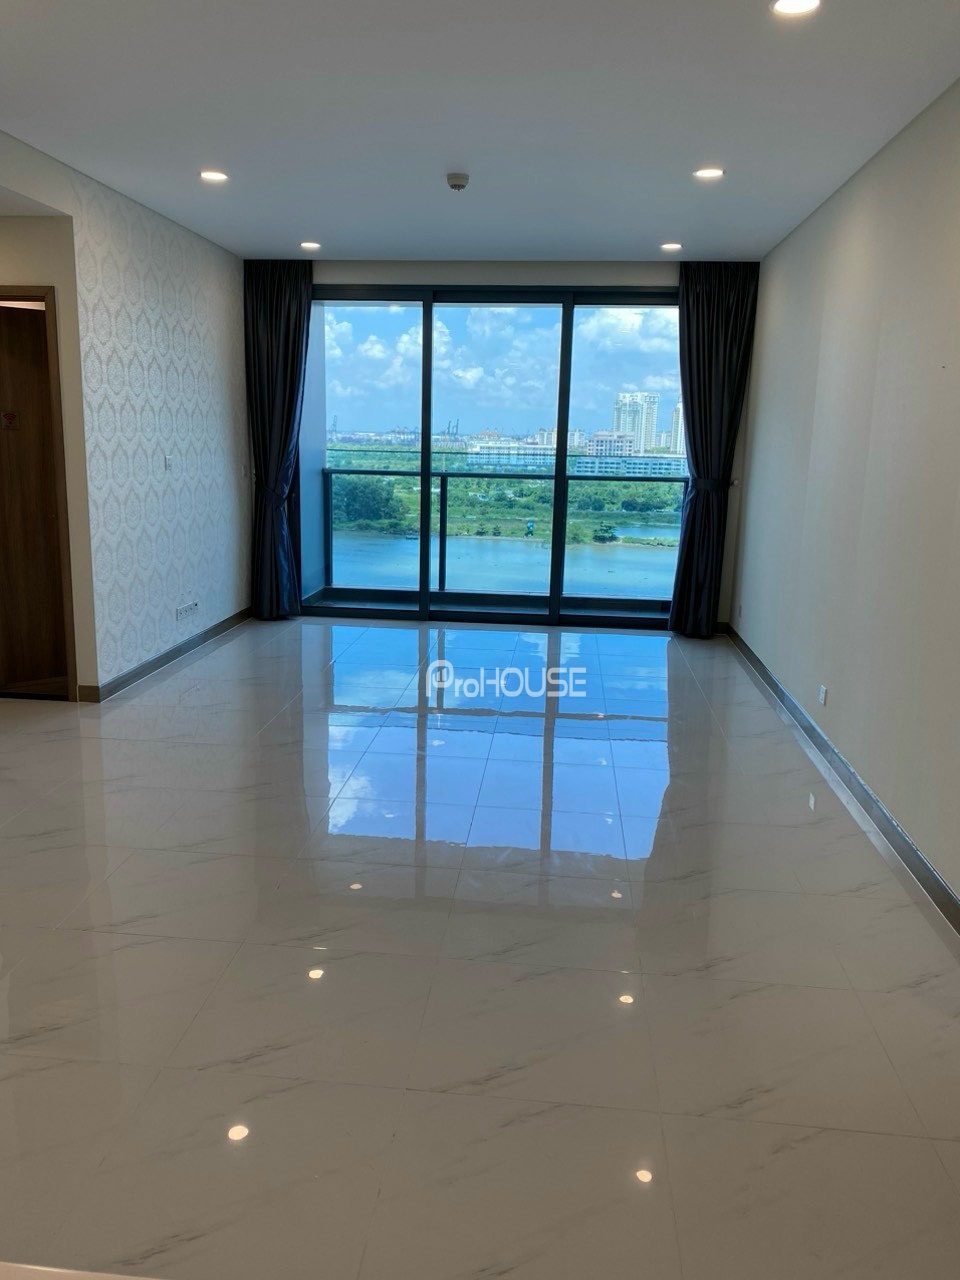 Direct river view 3-bedroom apartment for rent at Sunwah Pearl with basic furniture